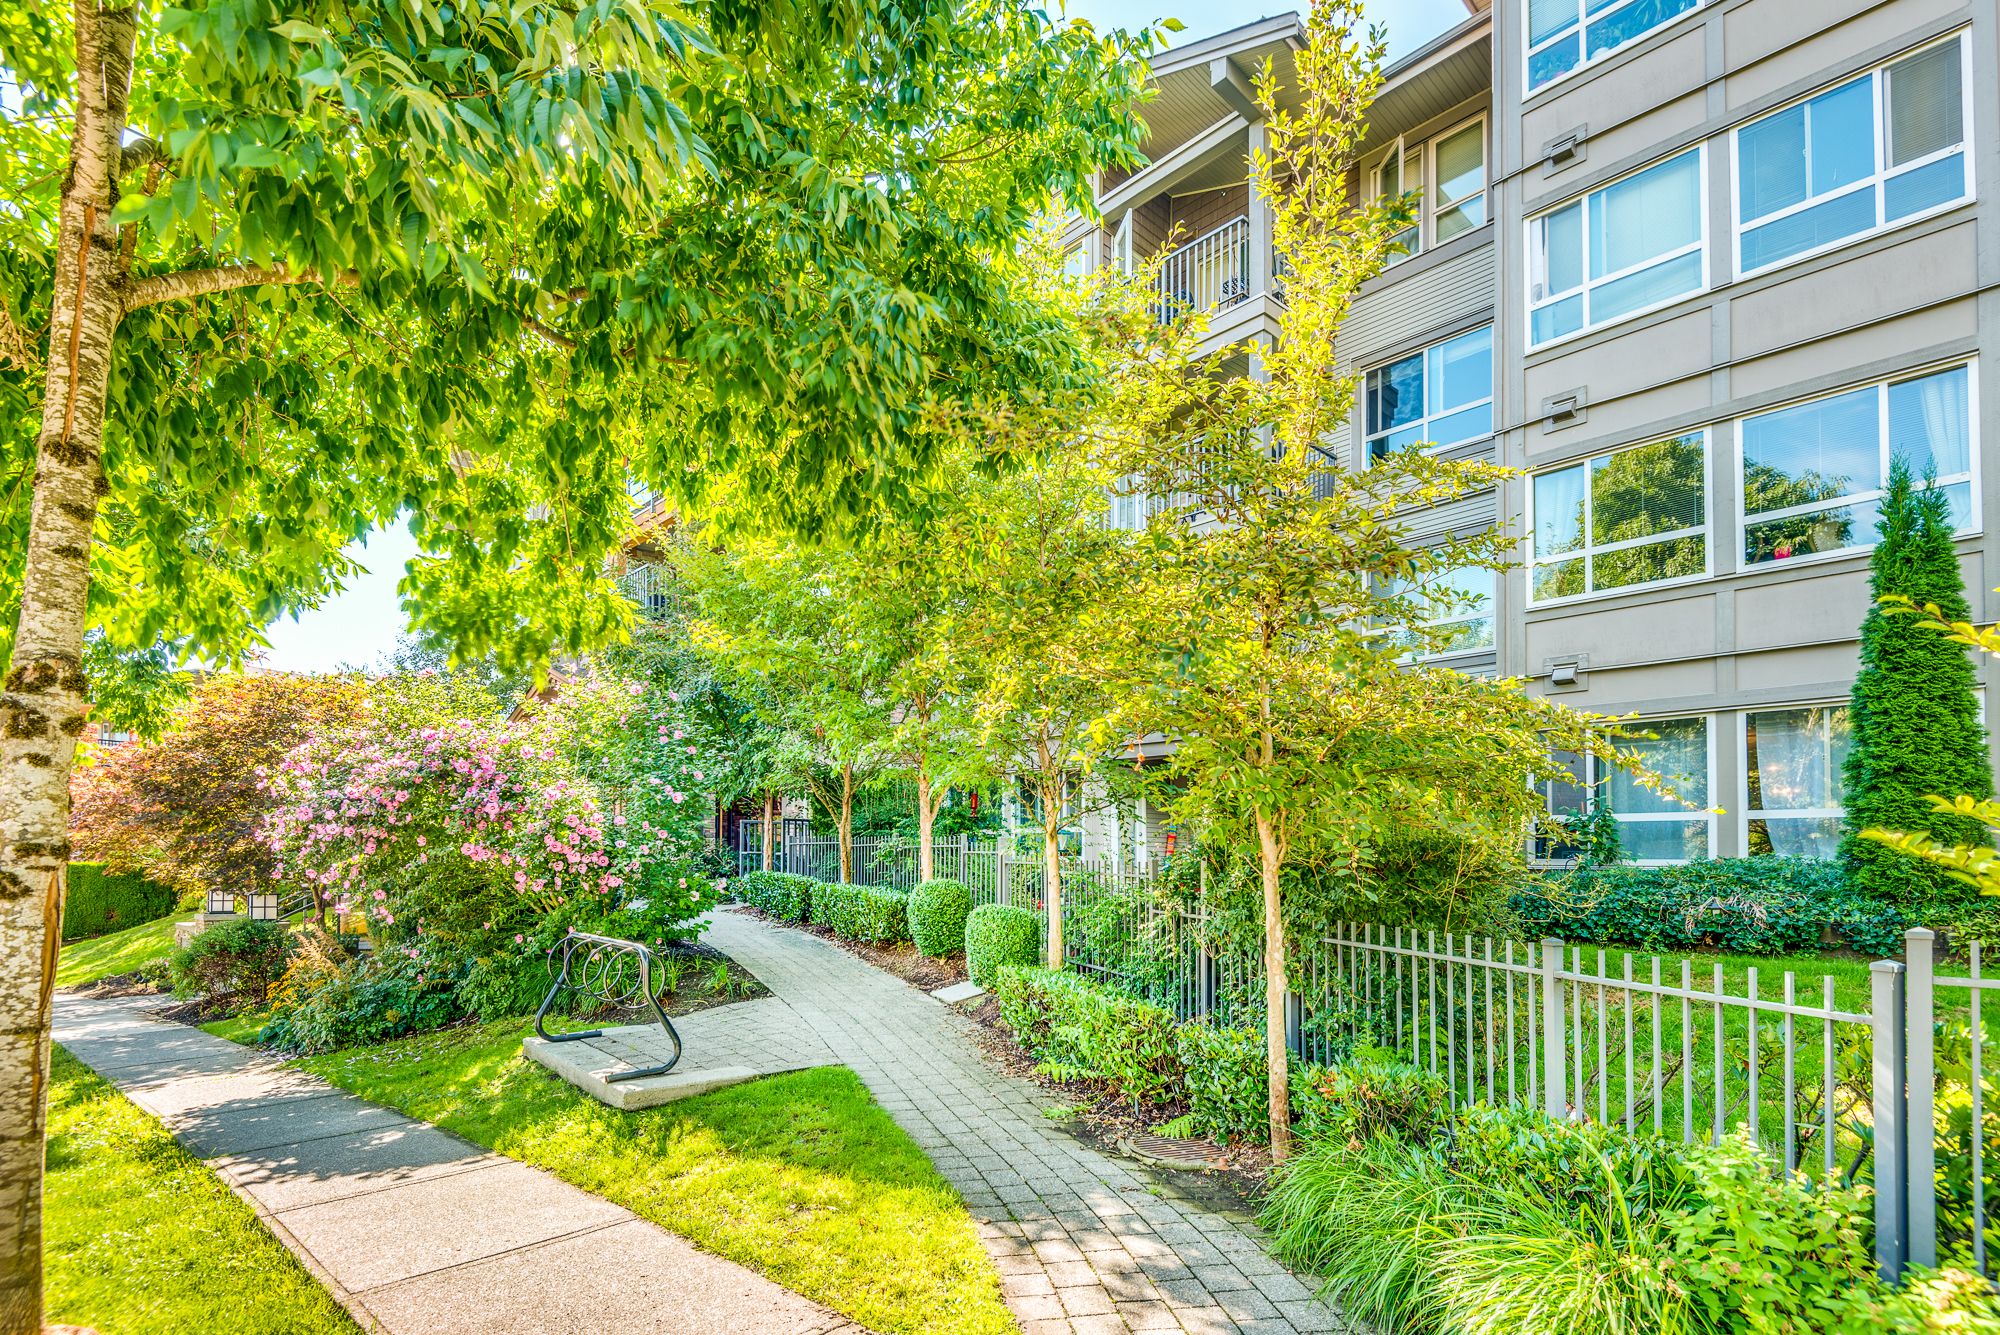 Main Photo: 313 3132 DAYANEE SPRINGS Boulevard in Coquitlam: Westwood Plateau Condo for sale : MLS®# R2608945